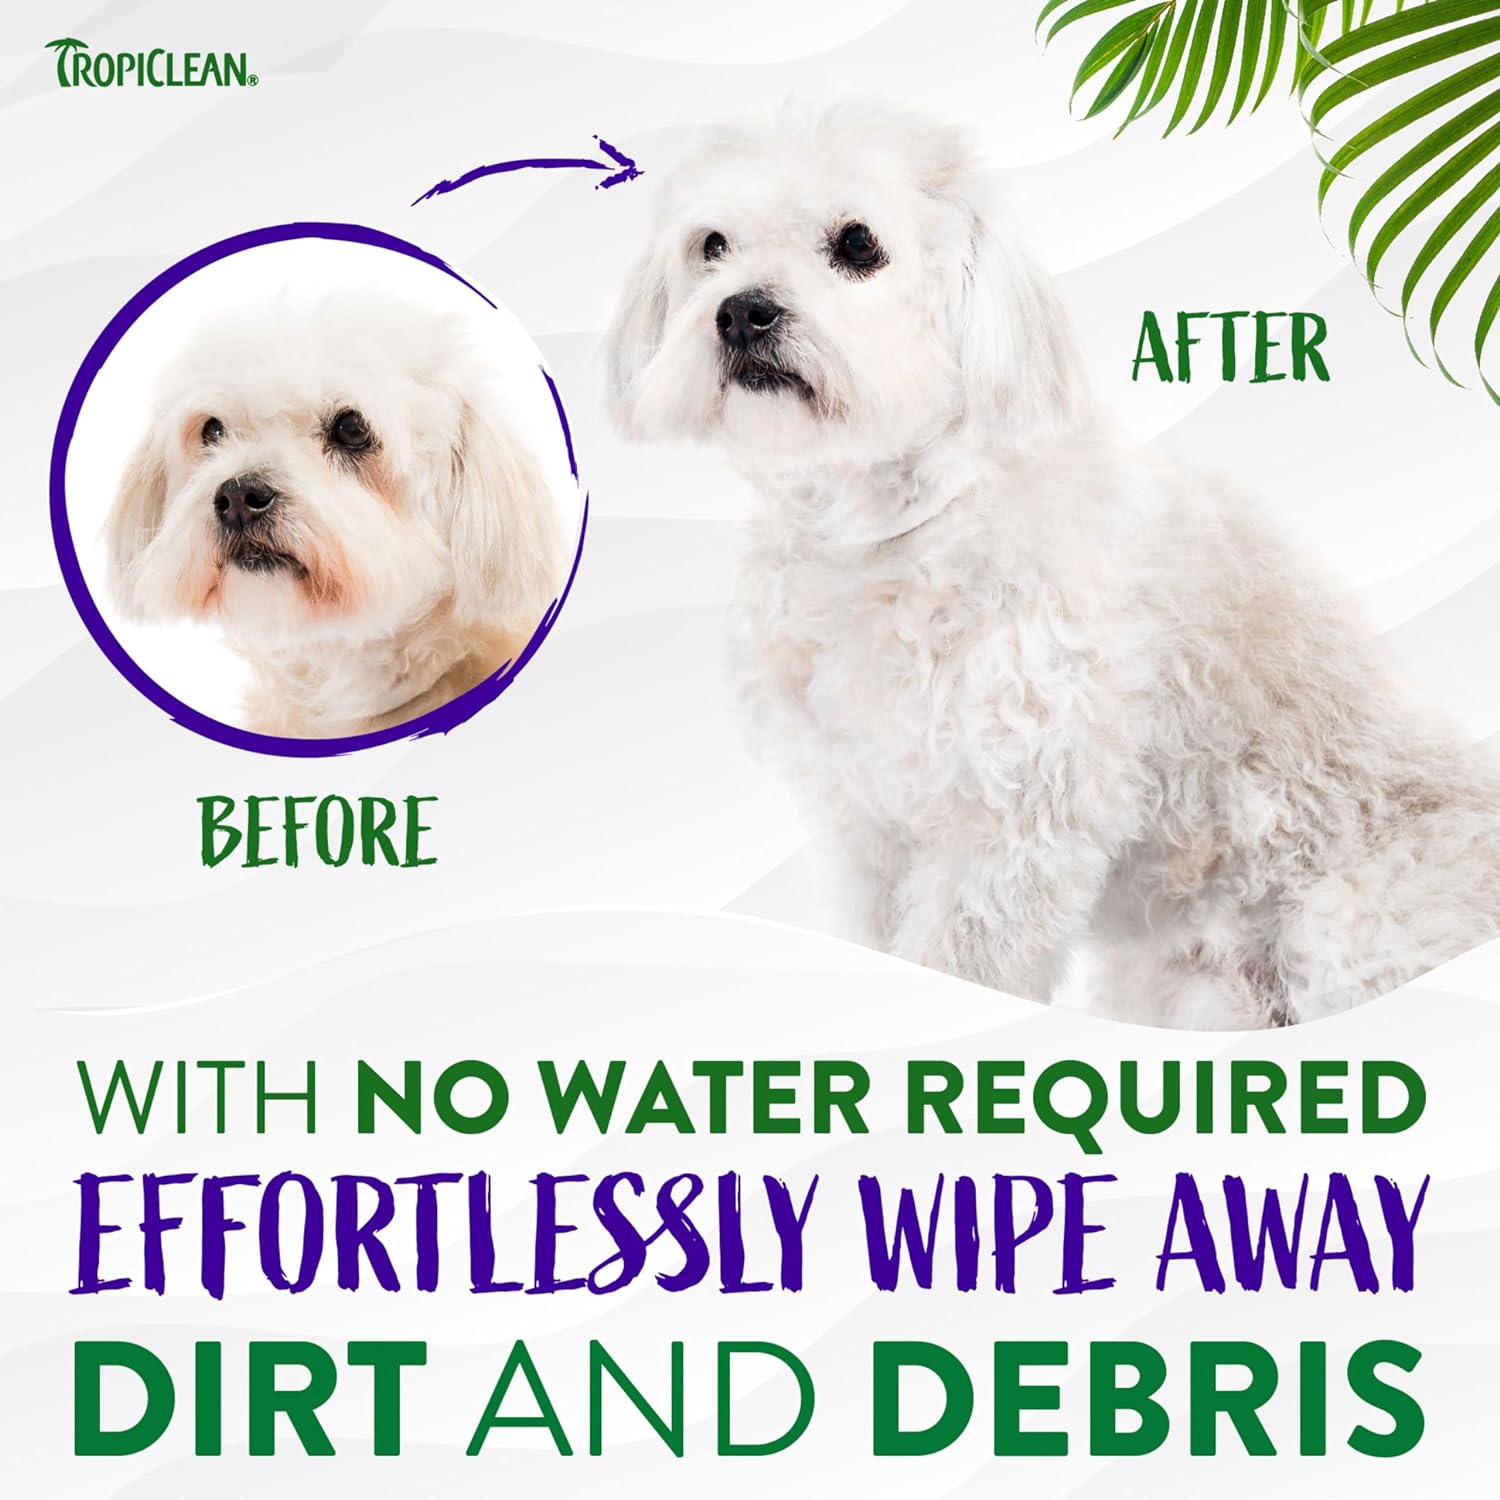 Tropiclean Waterless Facial Cleanser for Pets - Tearless, No-Rinse Formula - Helps Remove Stains and Dirt - For Dogs & Cats - Free from Parabens, Dye - Warm Vanilla, 220 ml :Pet Supplies